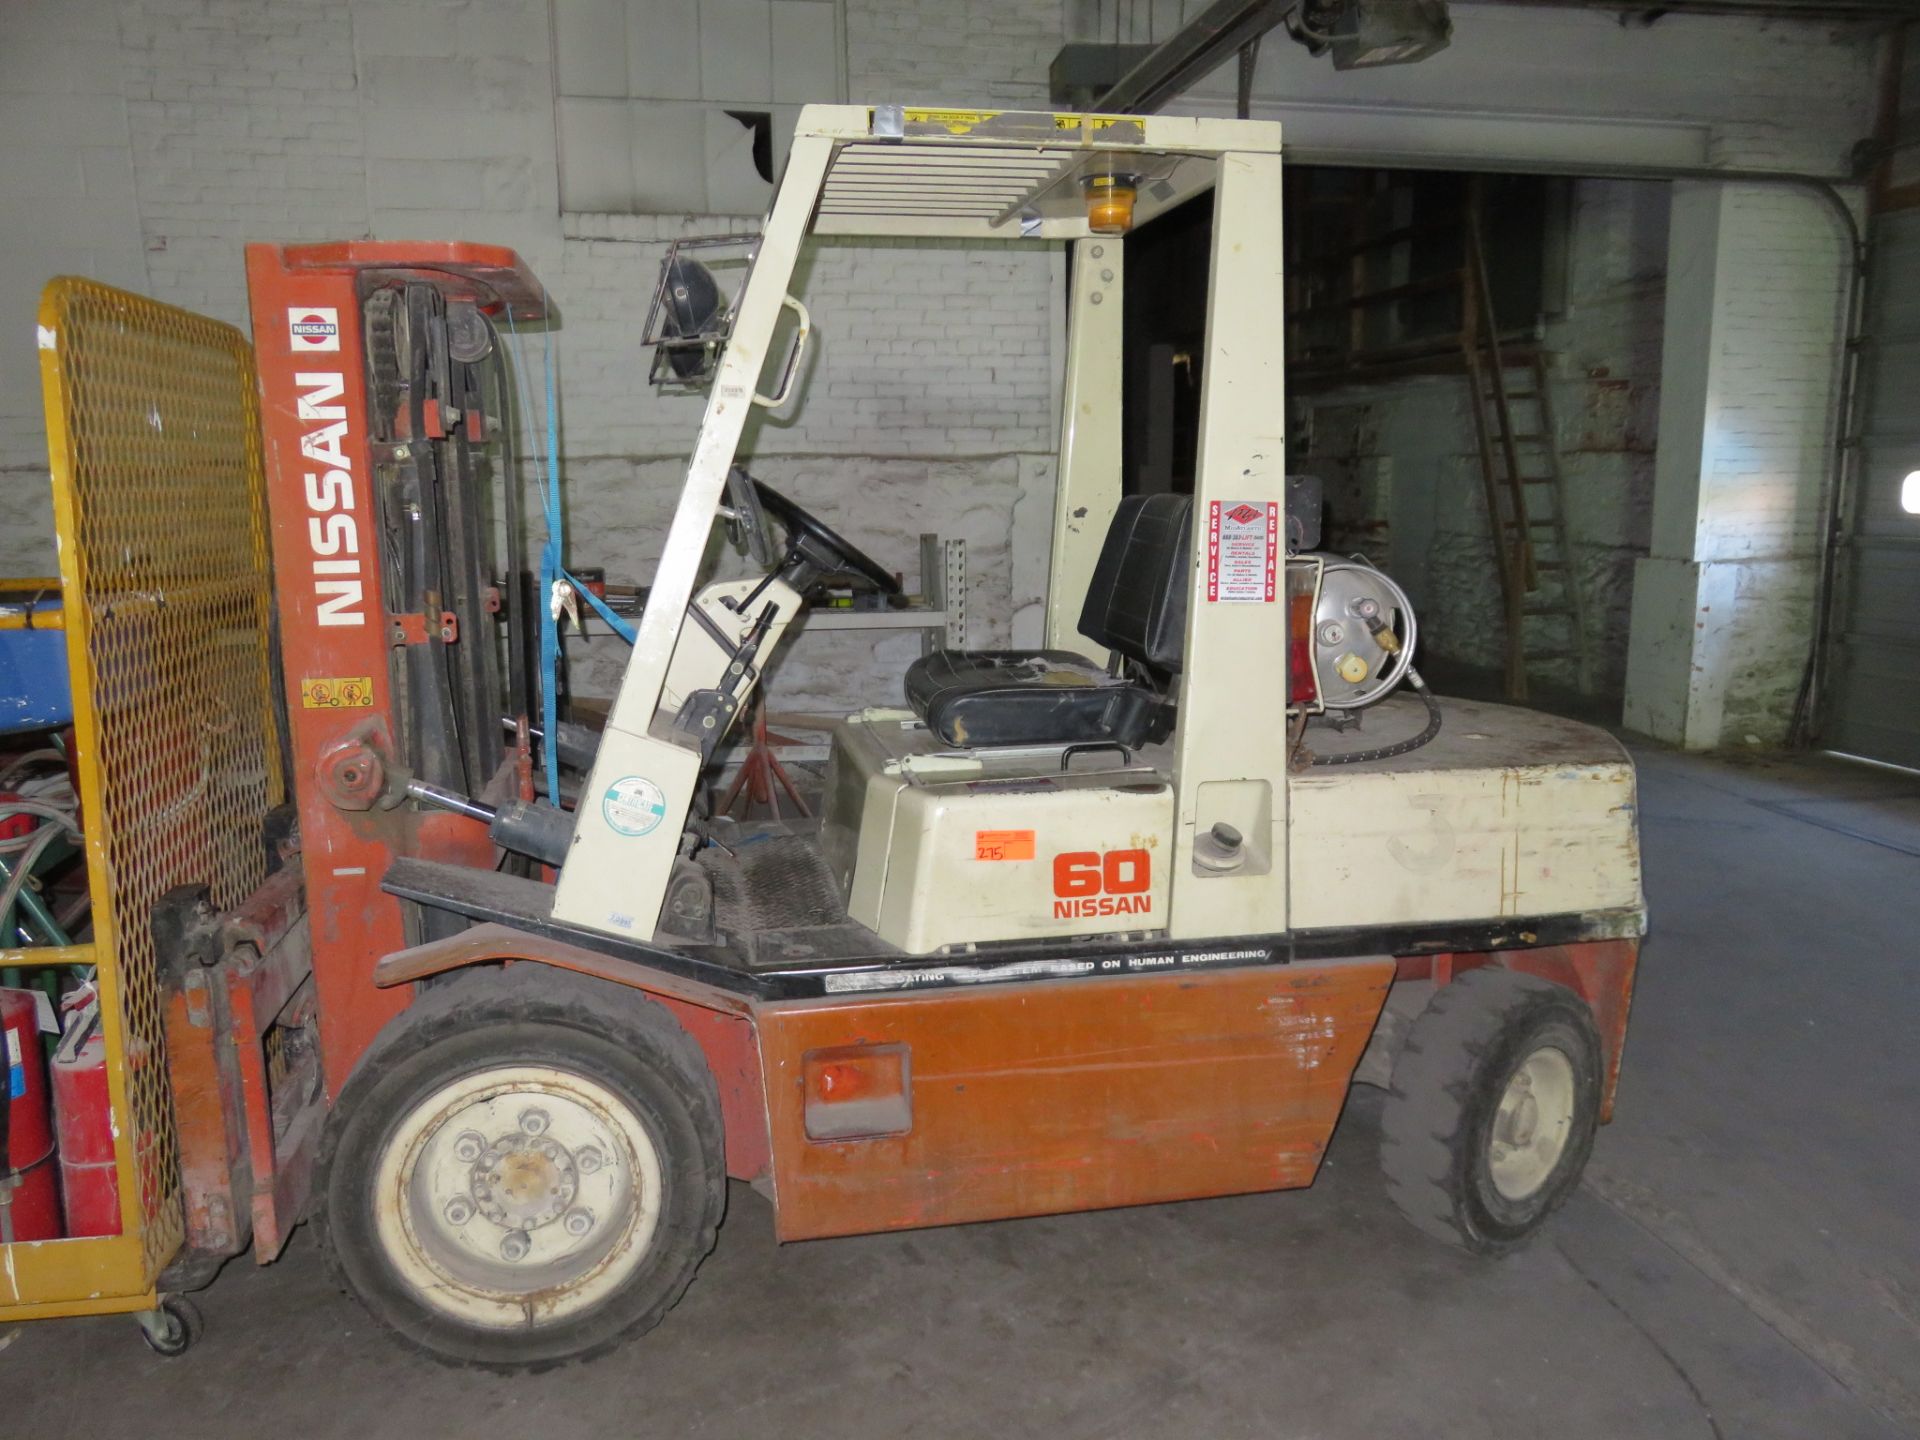 Nissan 60 Propane Forklift 6598 Hours Late Removal October 29th